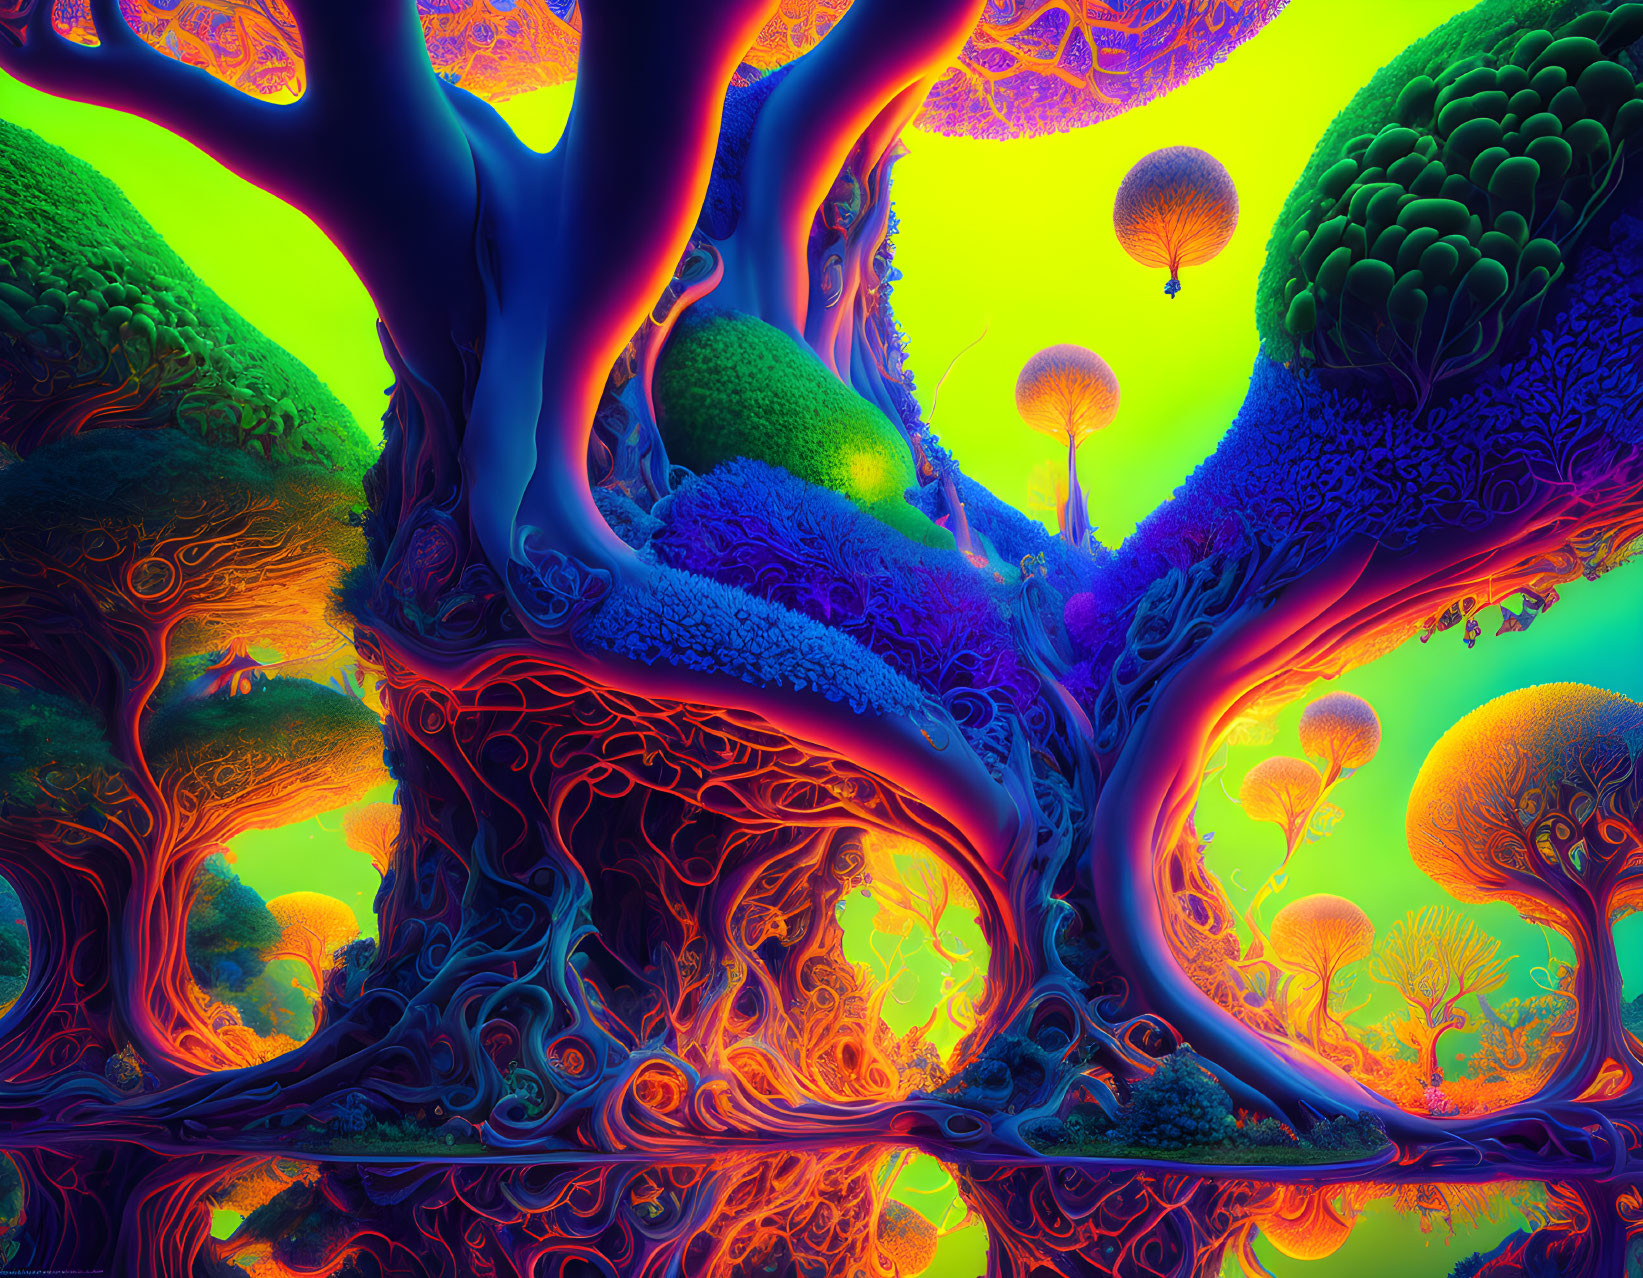 Colorful Psychedelic Landscape with Twisted Trees and Floating Balloons